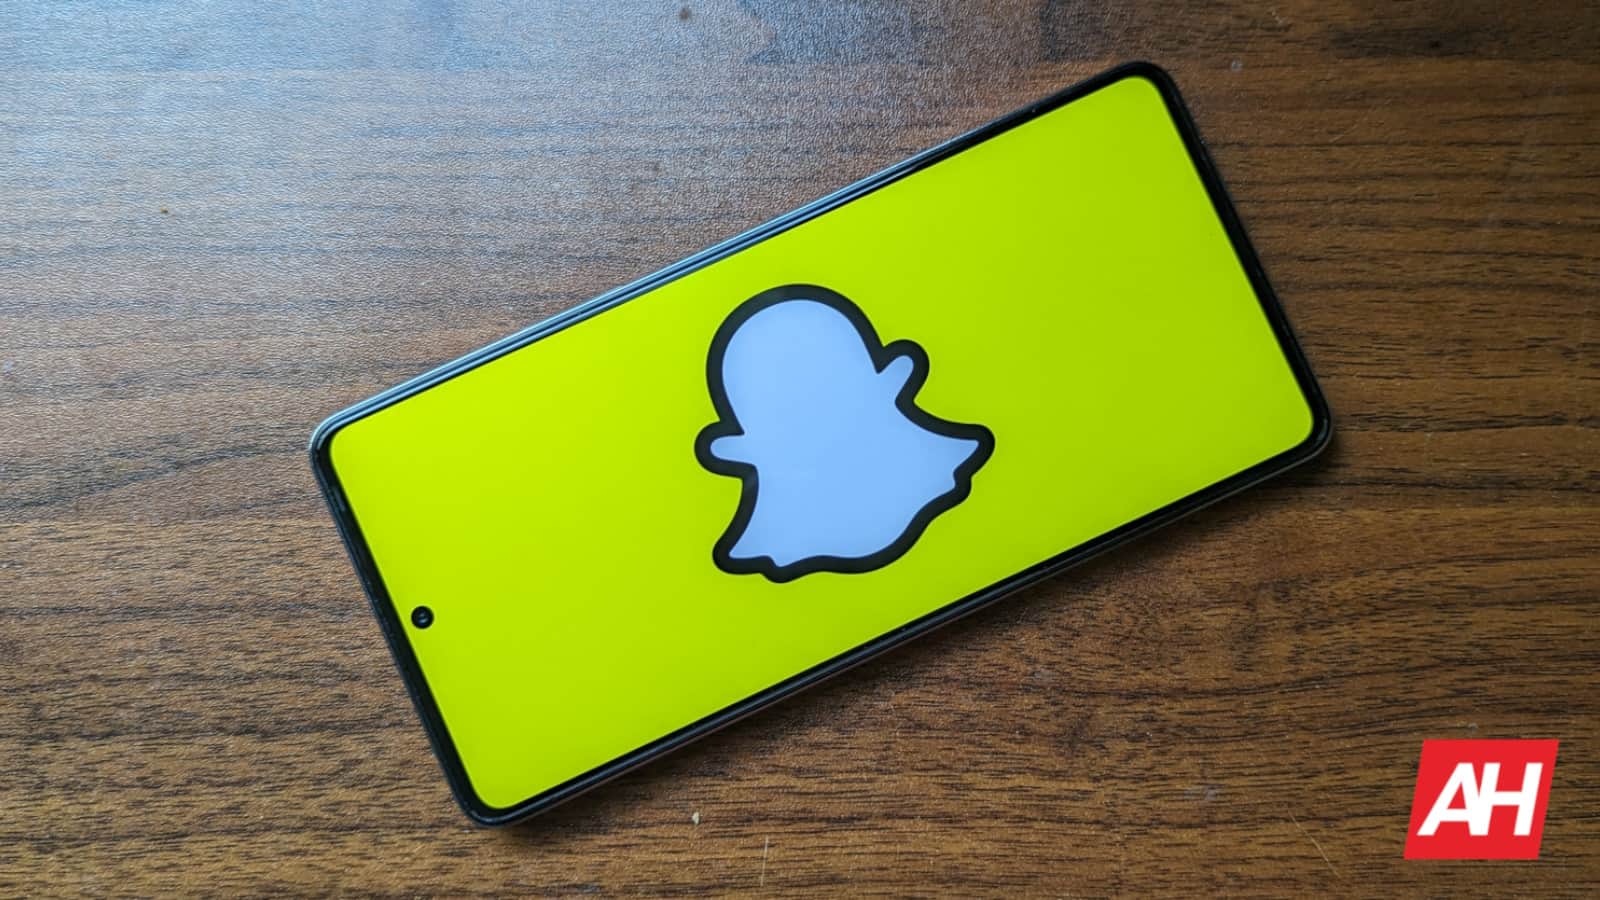 Featured image for Snapchat+ now lets users generate and share AI-generated images